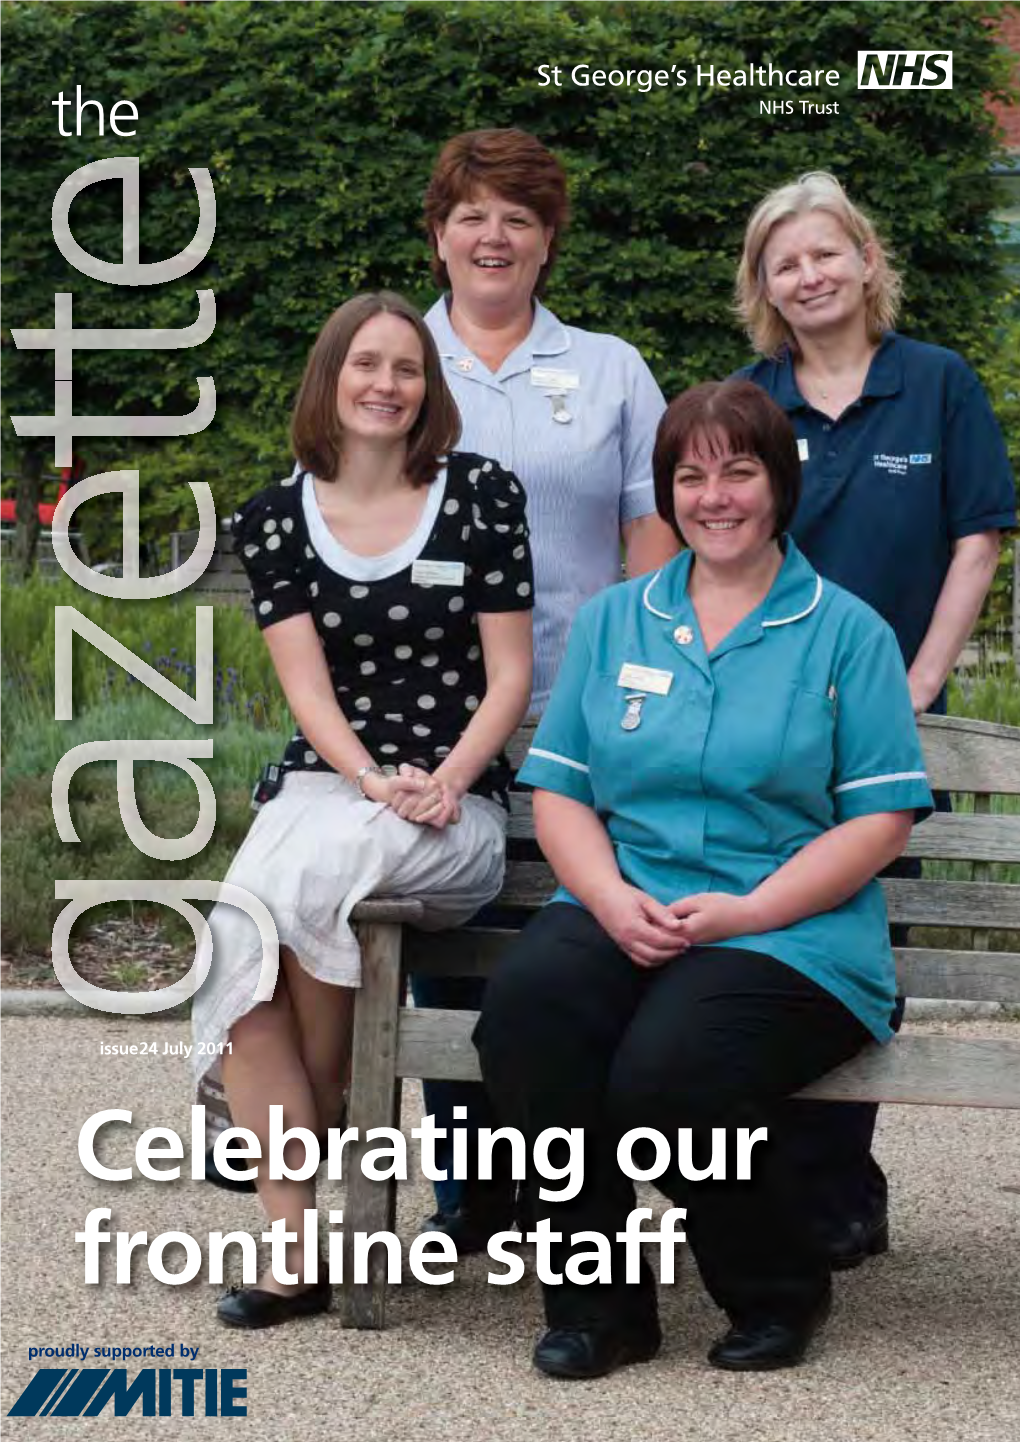 Celebrating Our Frontline Staff Proudly Supported by Econtents